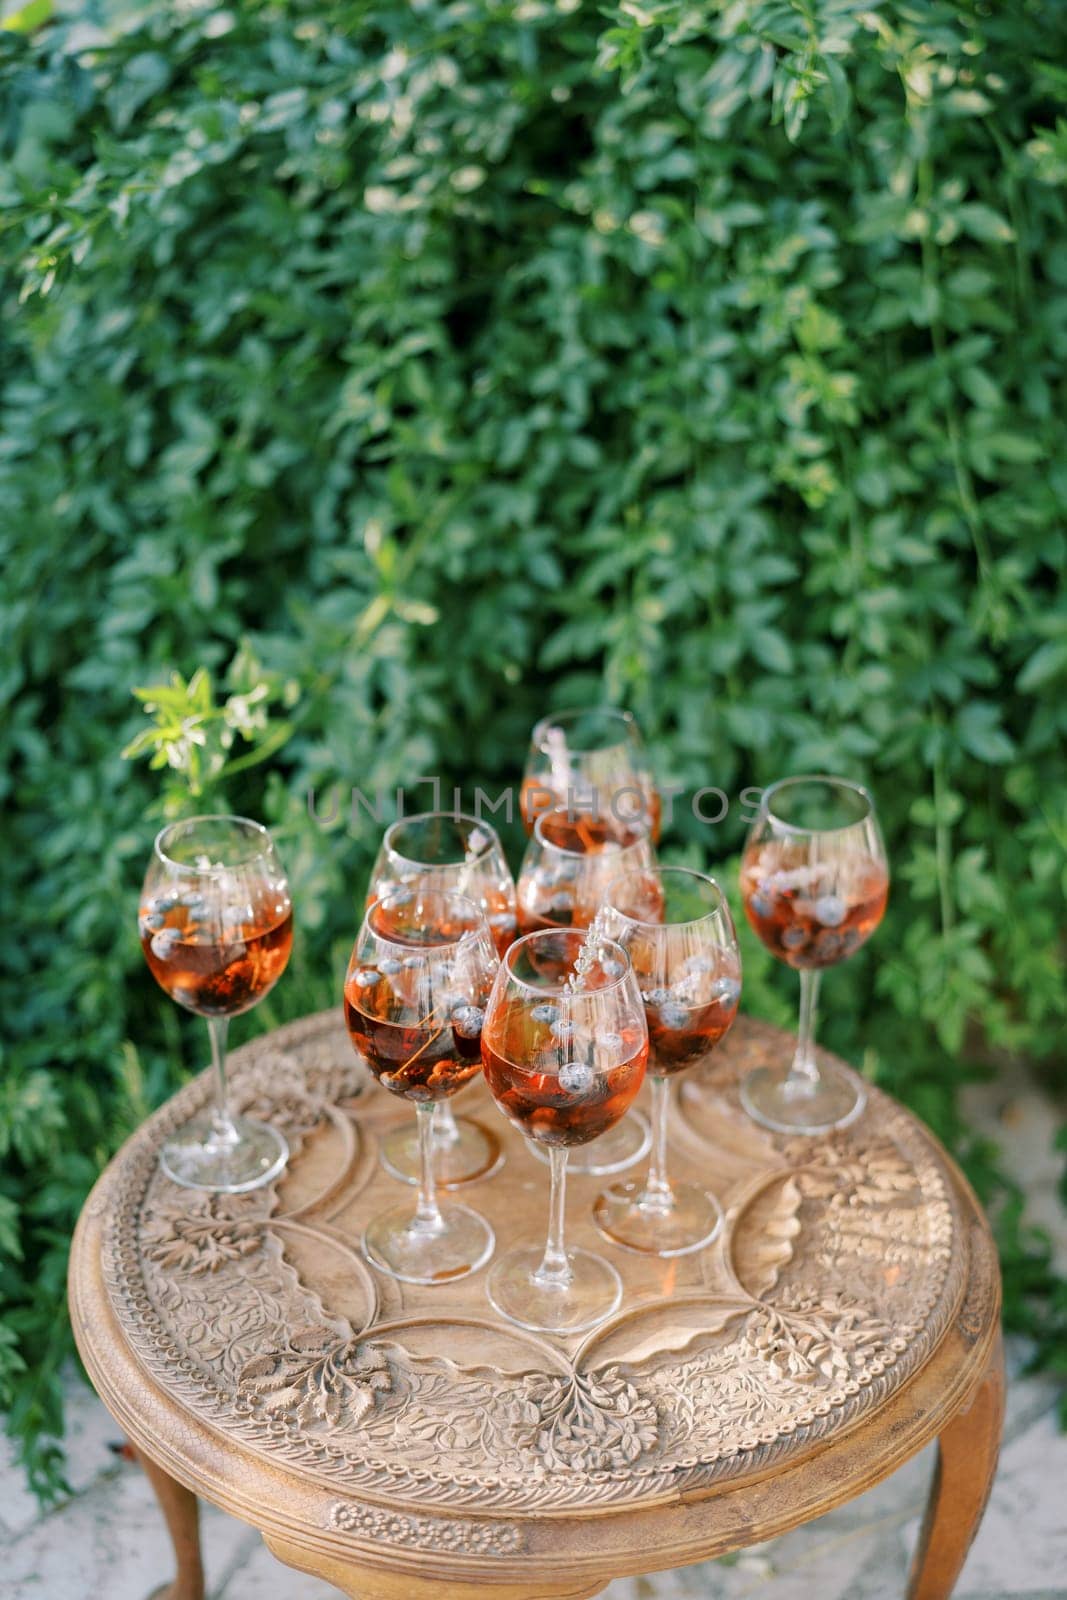 Glasses with red wine and floating grapes inside stand on a carved wooden table in the garden by Nadtochiy